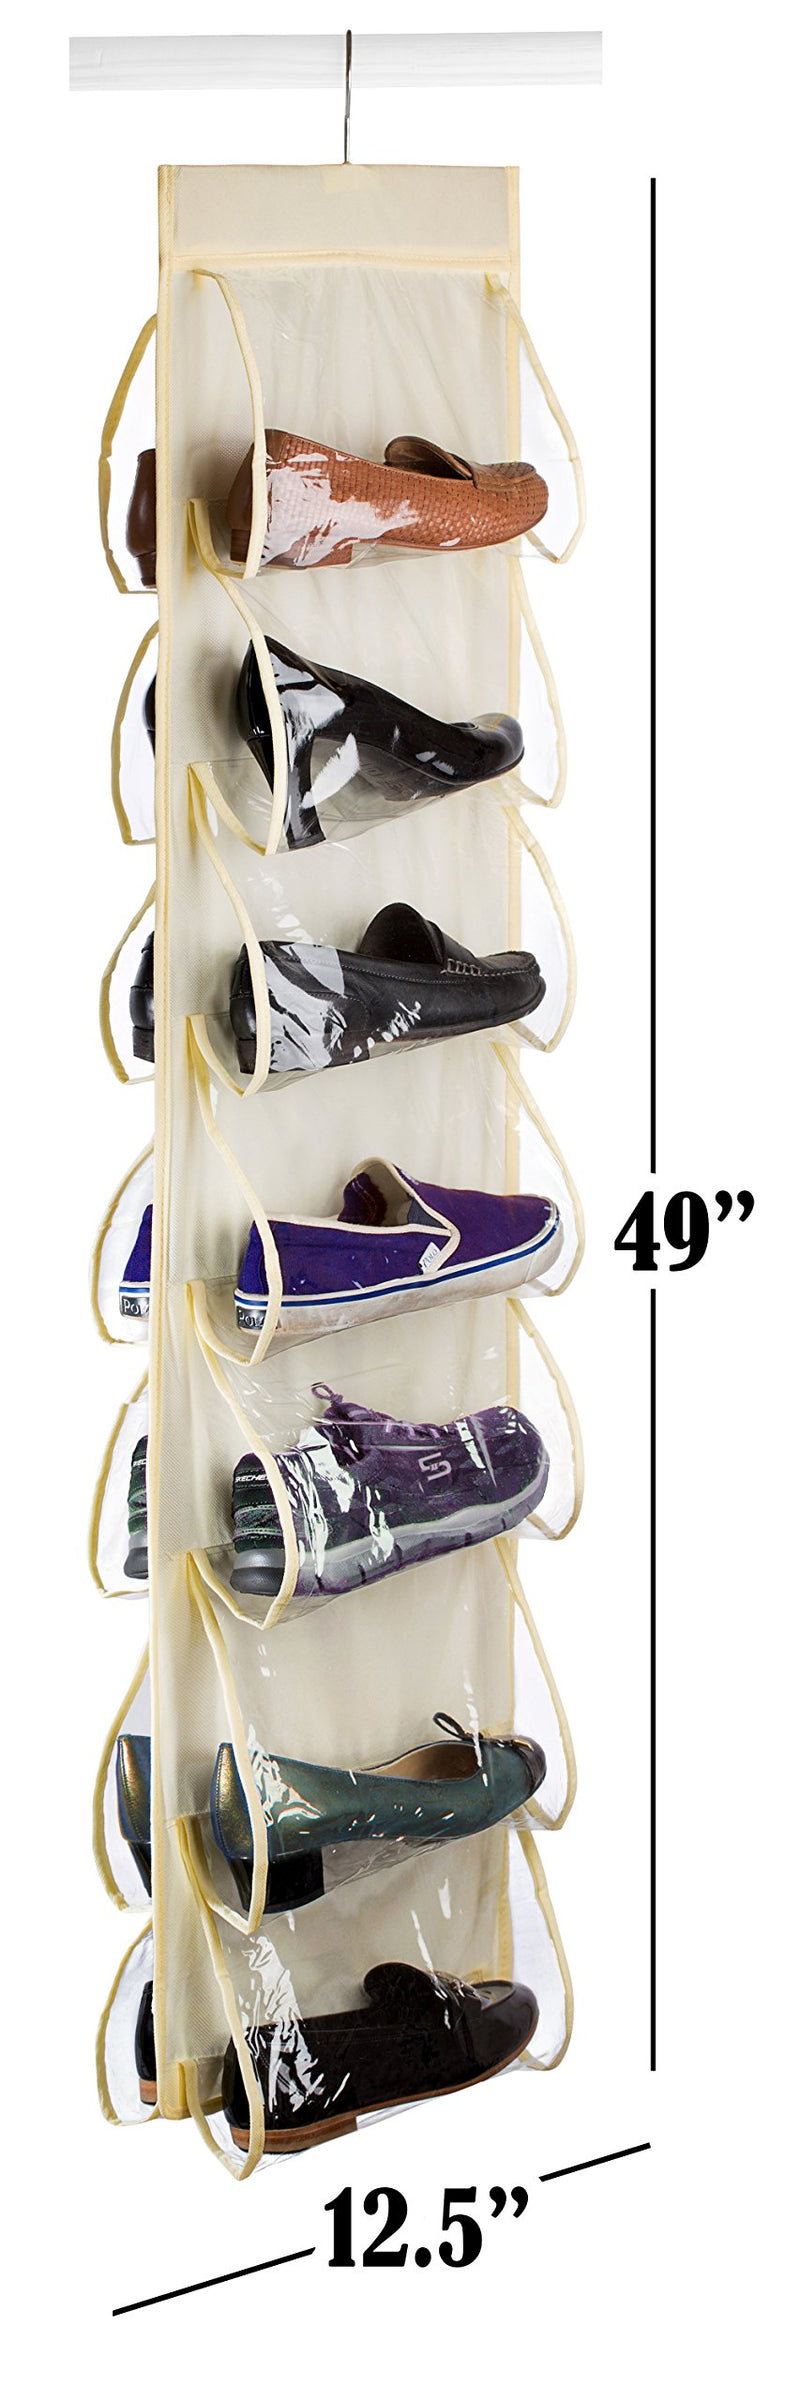 NewNest Australia - Hanging Shoe Organizer - 14 Pockets - The Clear Pockets Will Protect Your Shoes, Handbags or Purse and Enable You to Find Them Easily. Hang it in a Closet to Keep Your Closets Neat and Organized. 